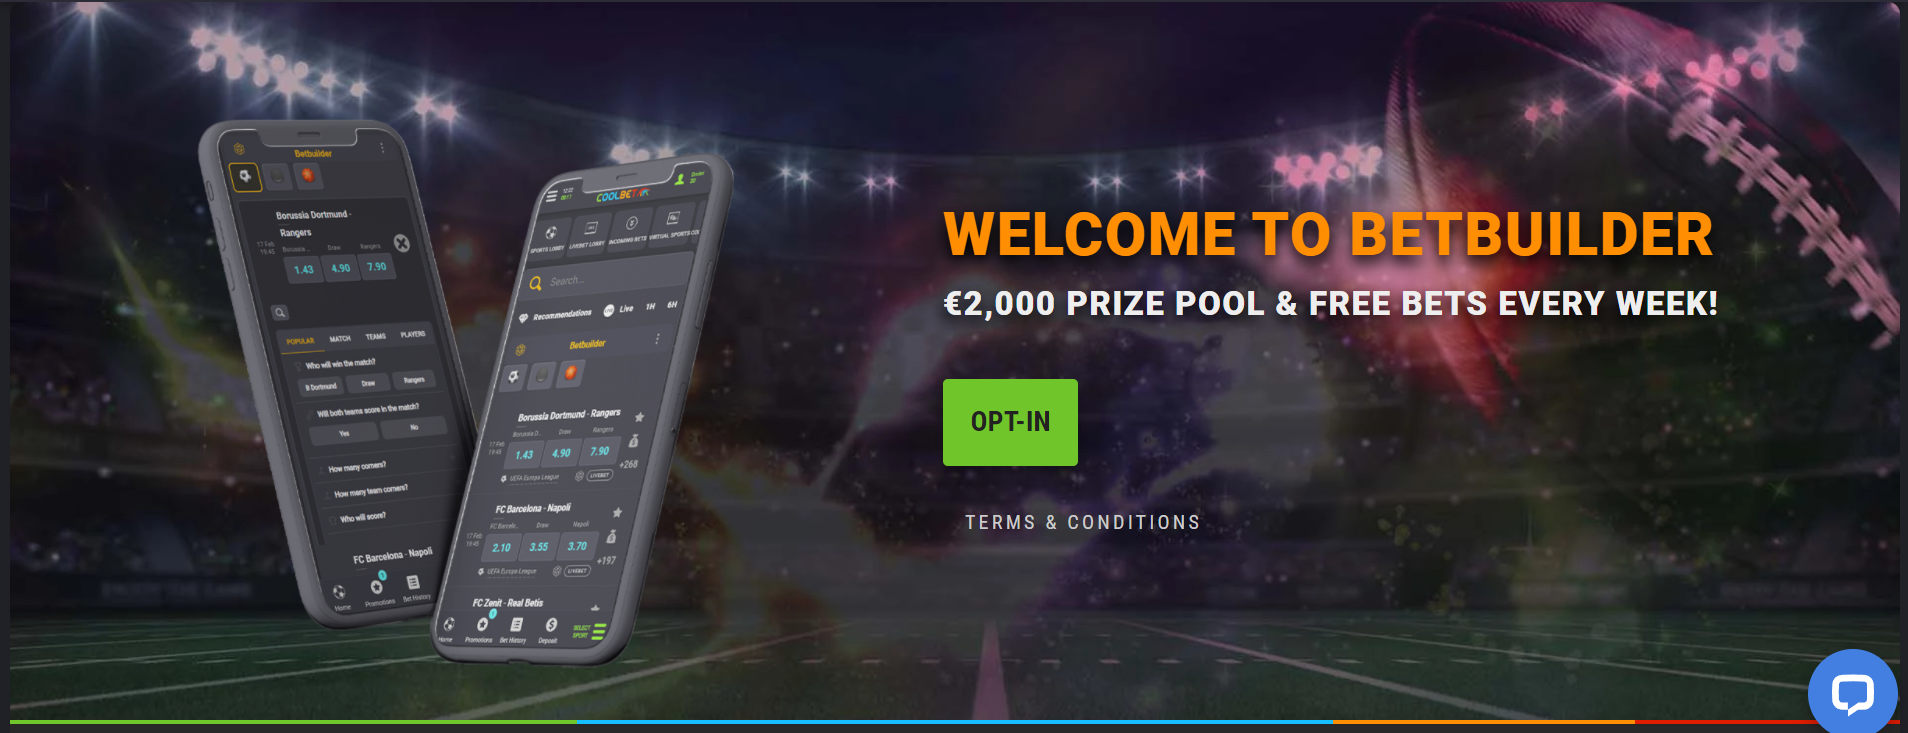 With the BetBuilder campaign of Coolbet, players get a chance to increase their winnings every week.